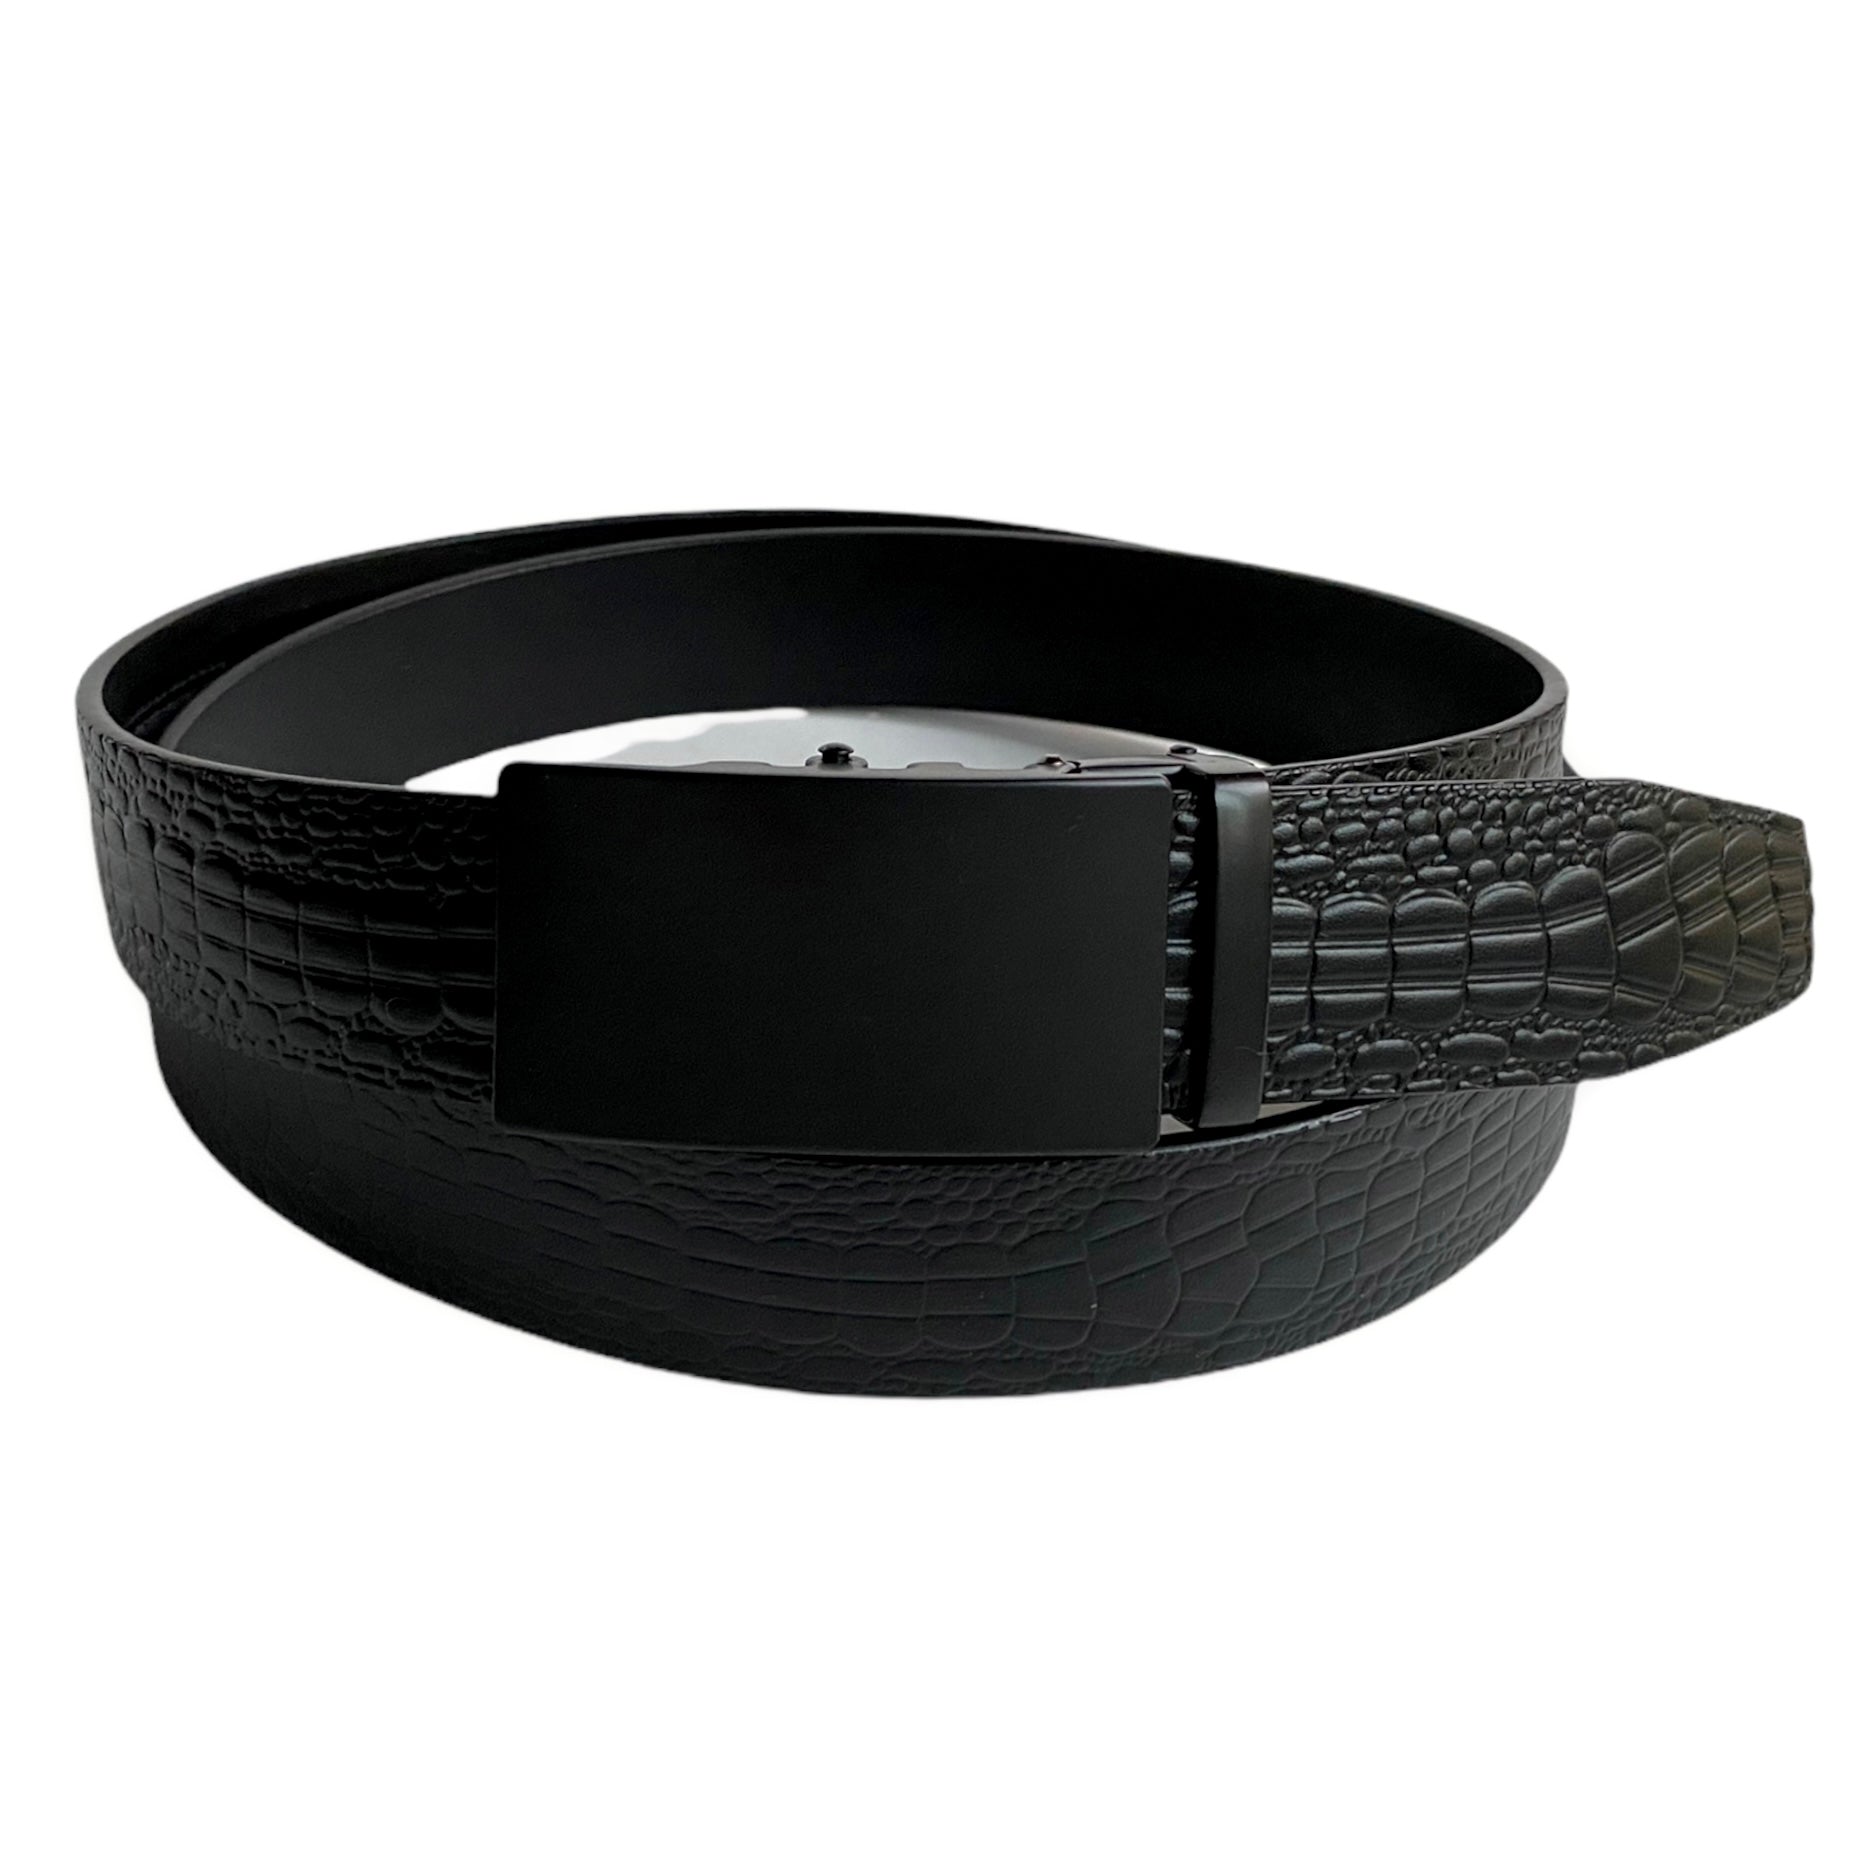 1.38" Genuine Leather Black Textured Strap And 1.38" Automatic Belt Buckle Black